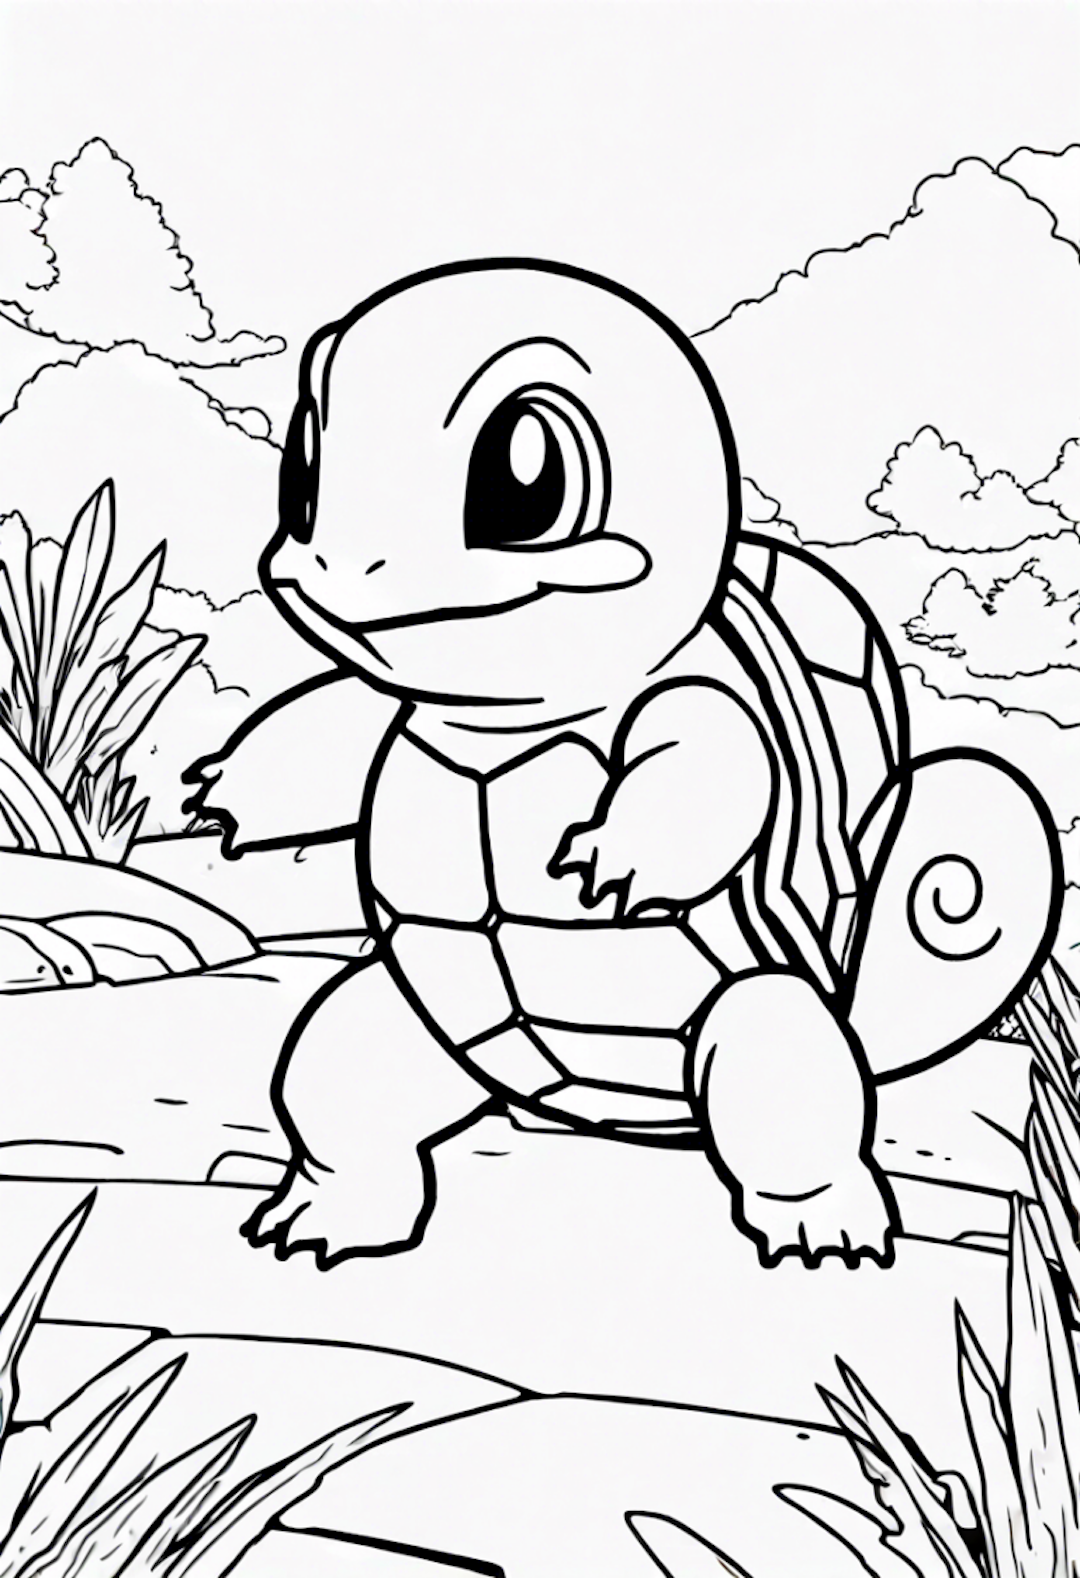 Squirtle’s Adventure in the Wild coloring pages